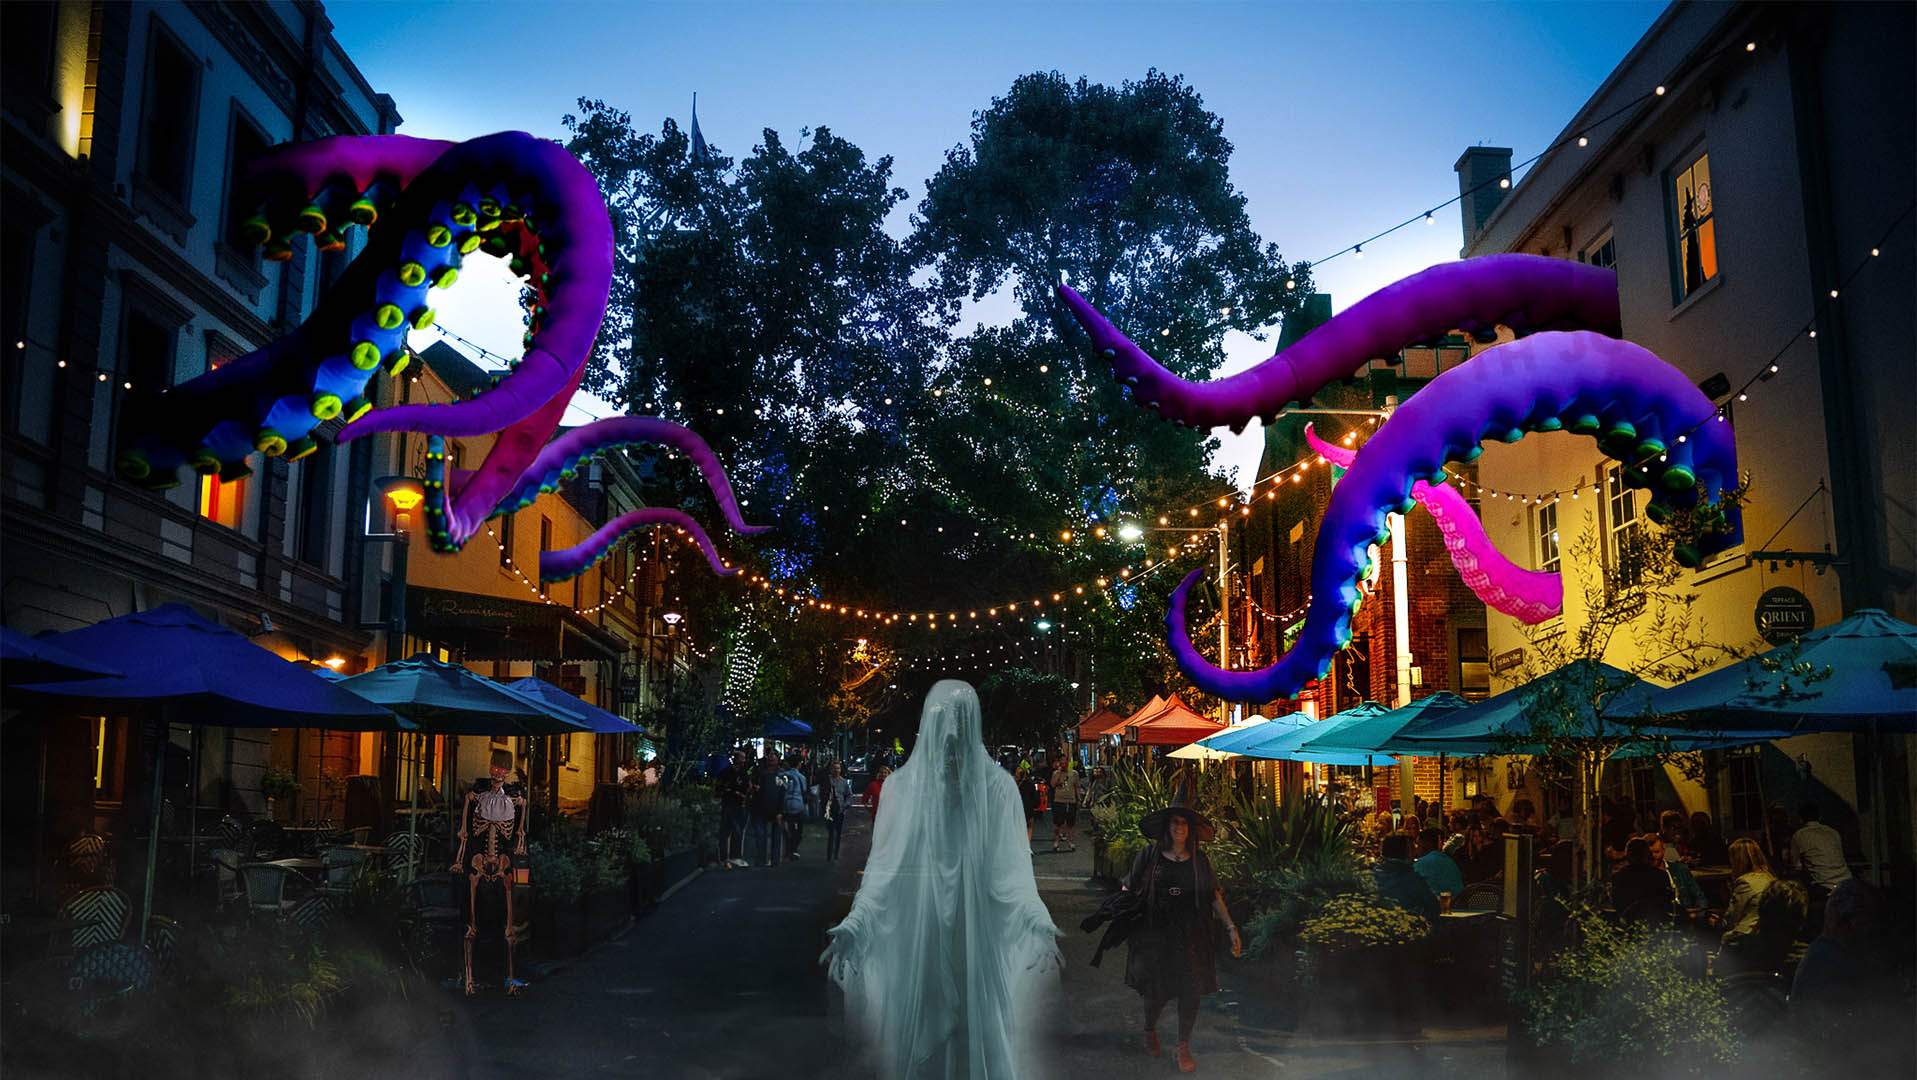 Coming Soon: This New Four-Day Halloween Festival Is Set to Turn The Rocks Into the Spookiest Spot in Sydney